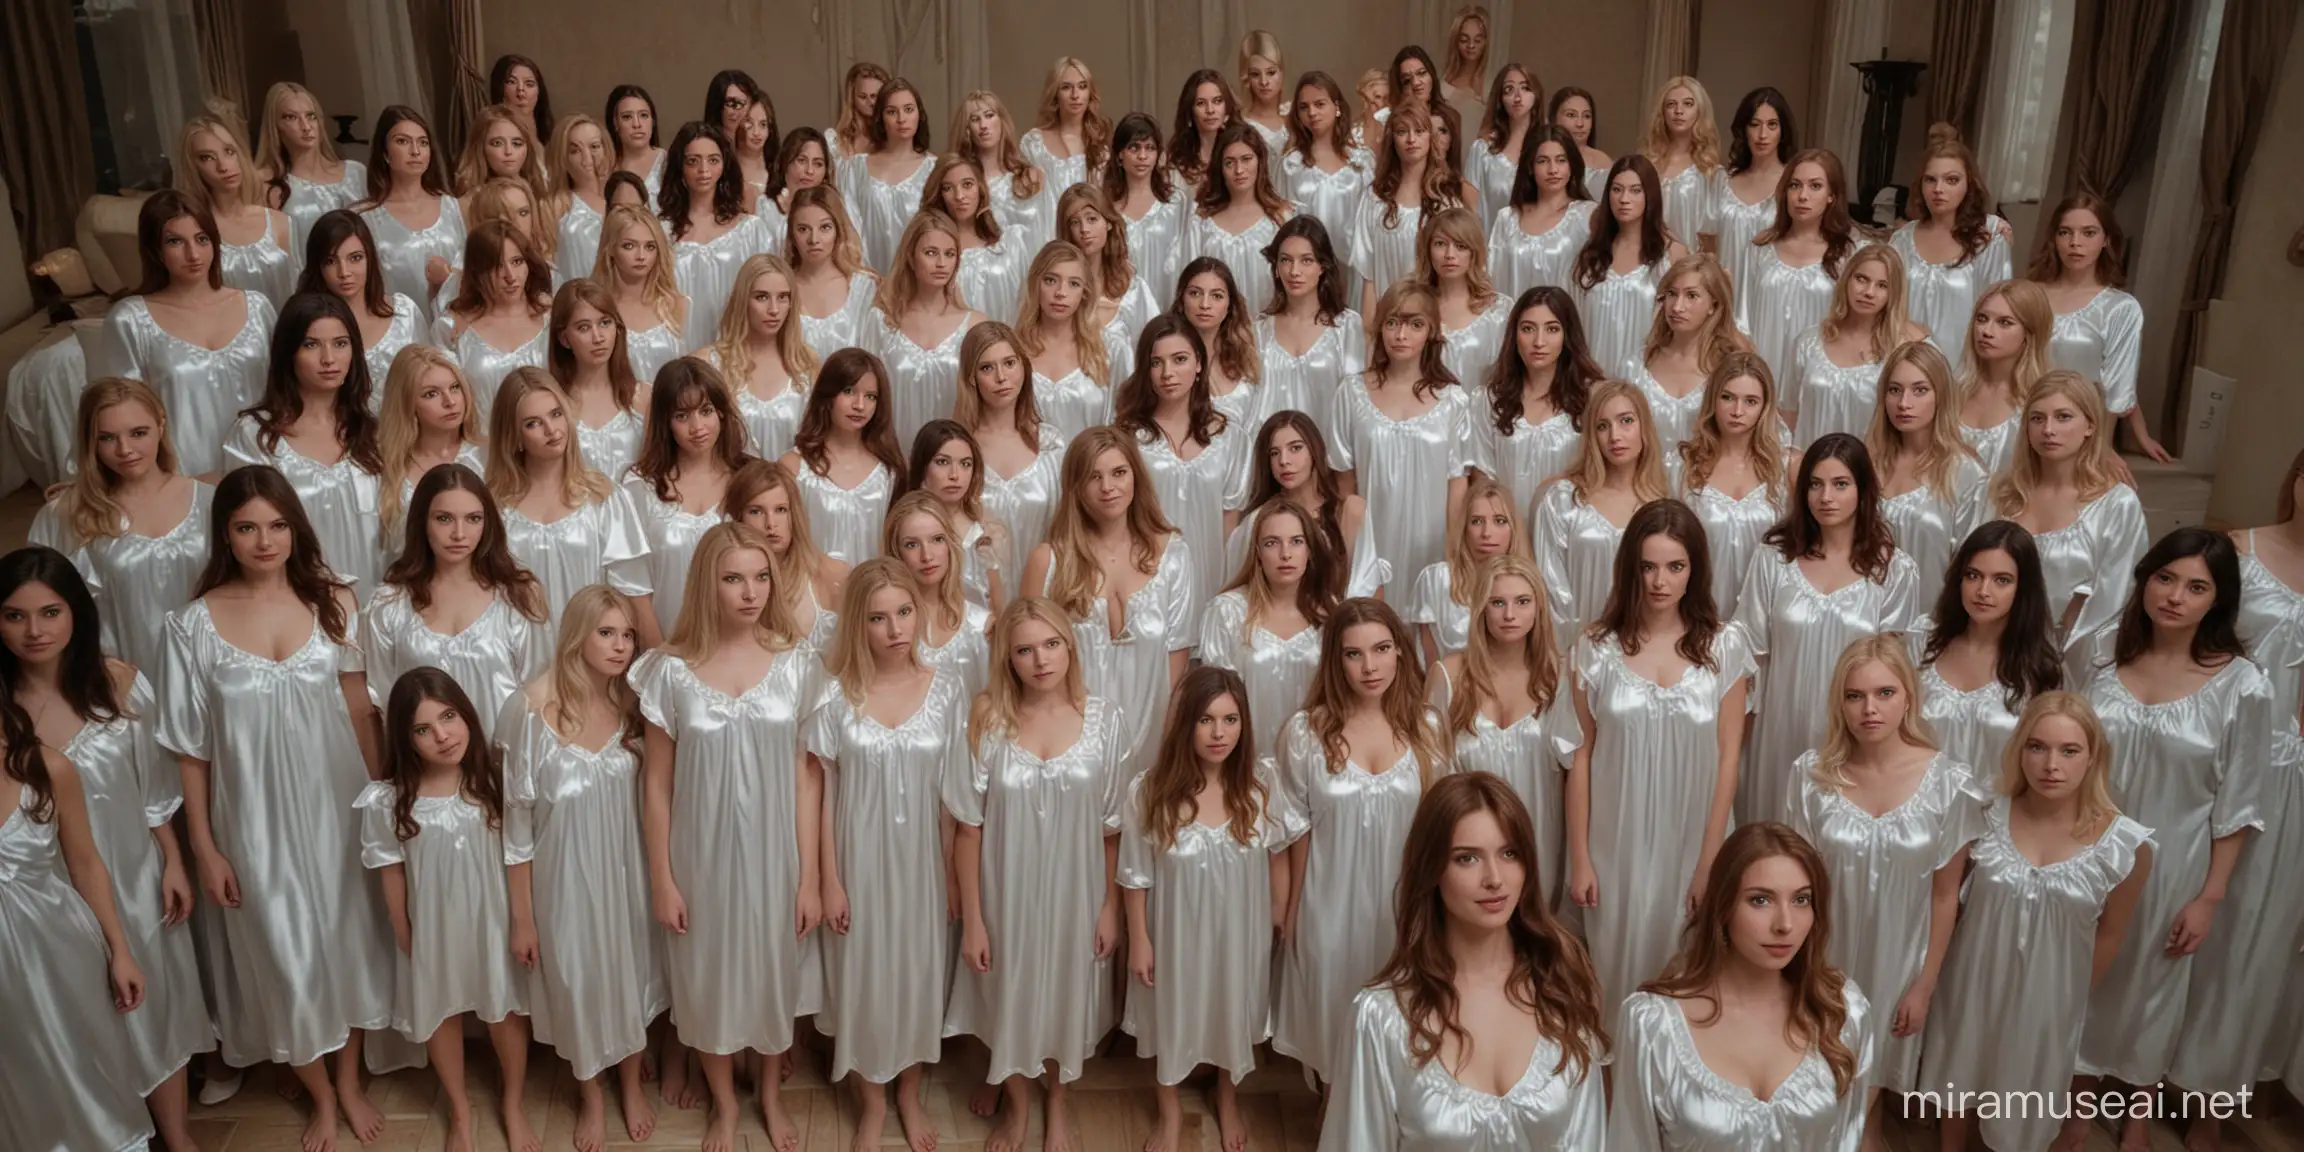 Gathering of Enigmatic Women in Satin Nightgowns